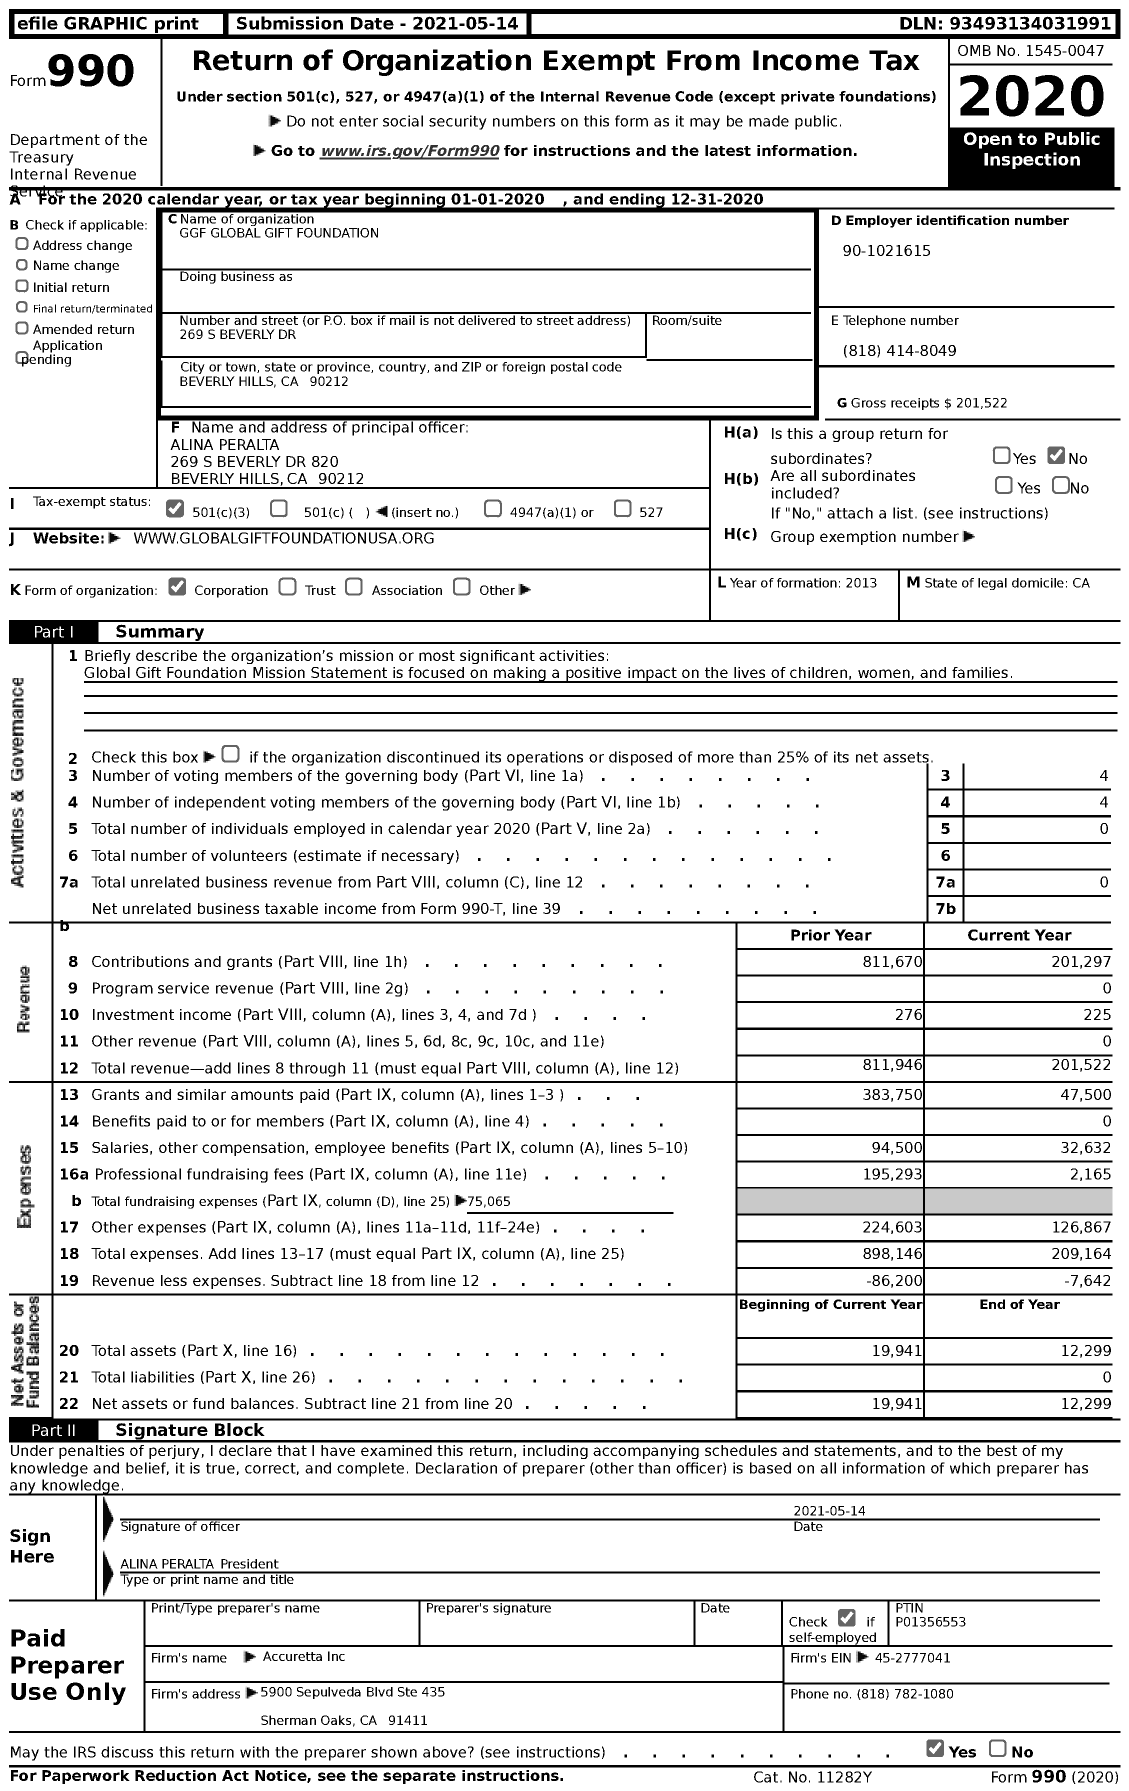 Image of first page of 2020 Form 990 for GGF Global Gift Foundation